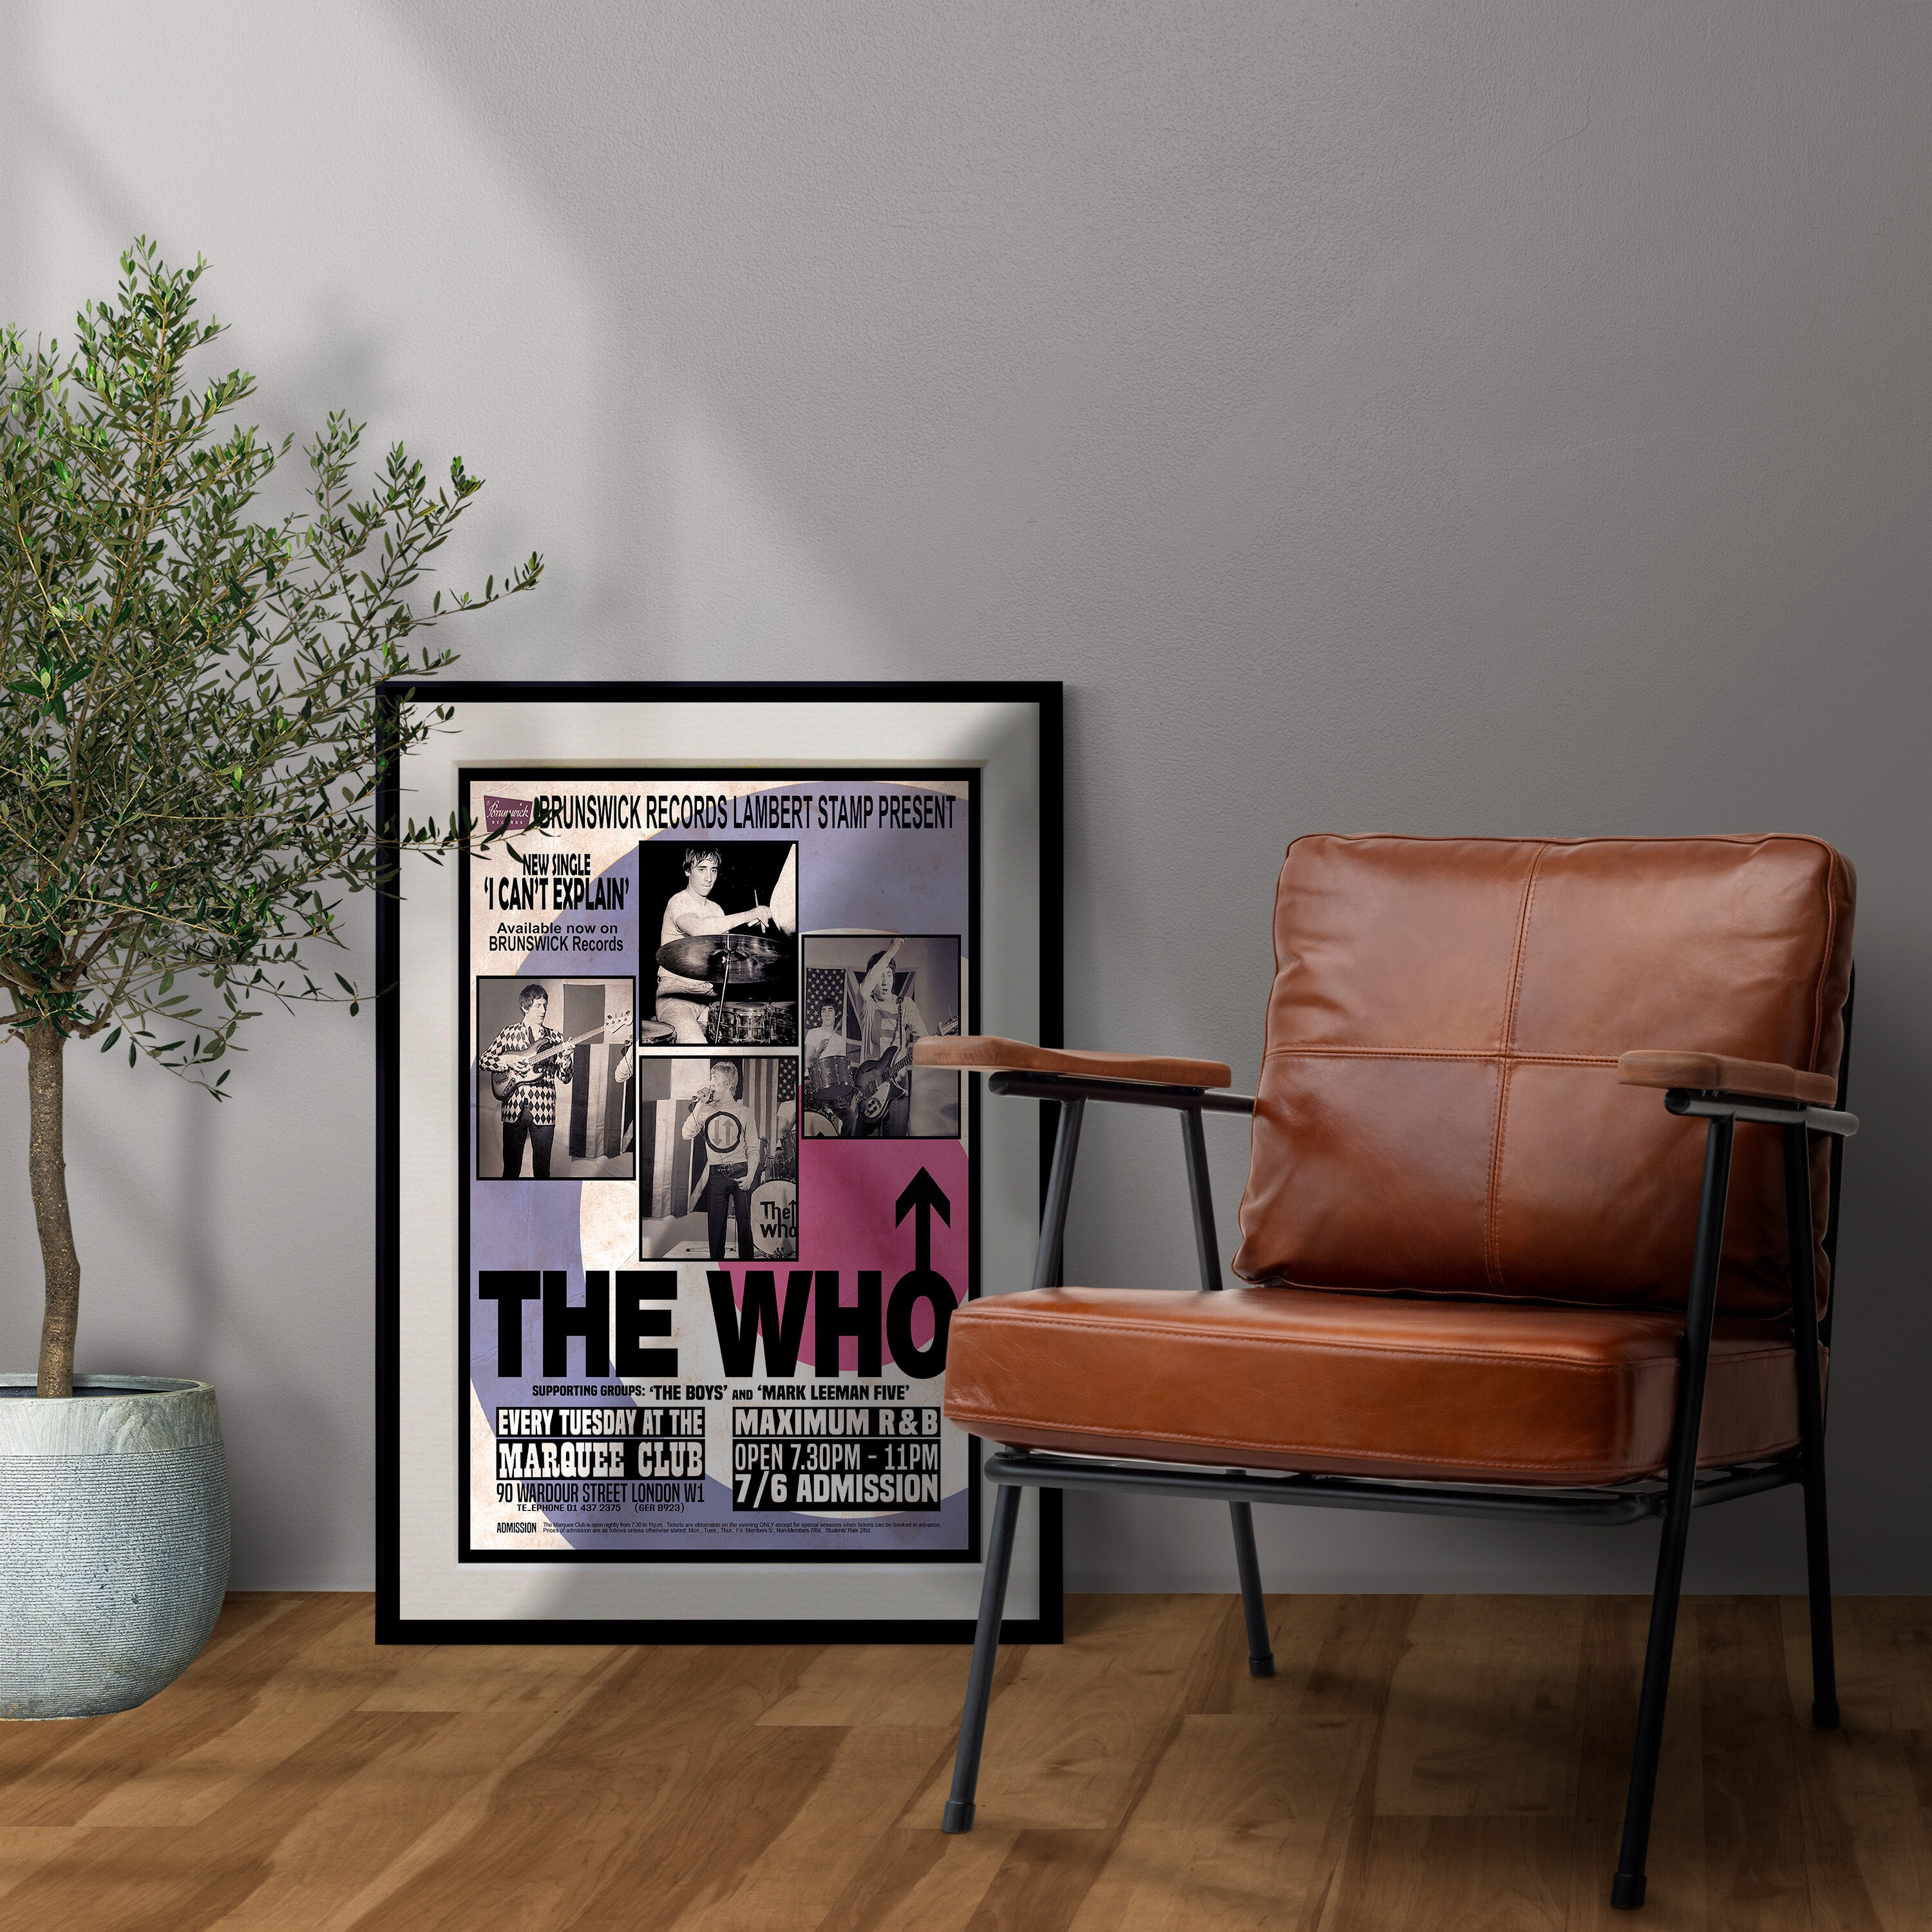 Discover The Who 1965 'At The Marquee Club' Concert Premium Matte Vertical Poster